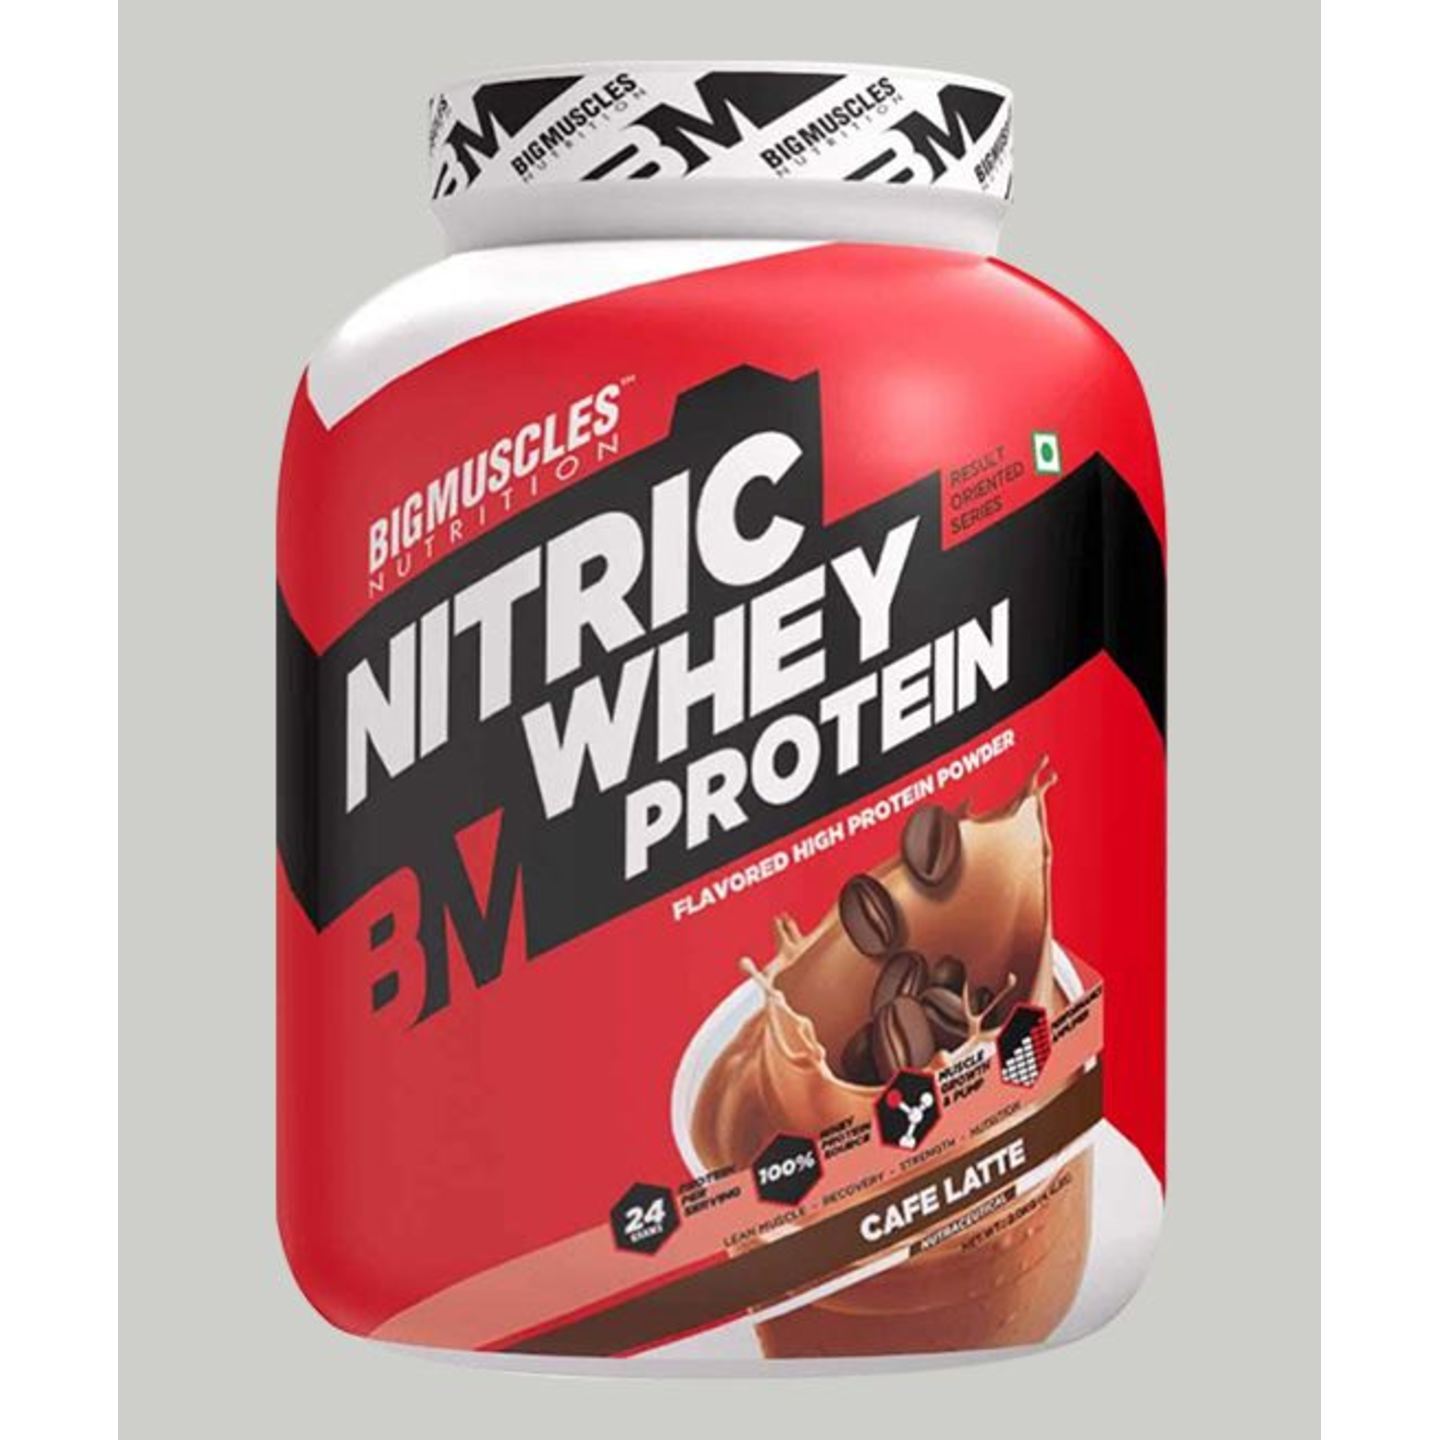 MastMart Bigmuscles Nutrition Nitric Whey Protein Caffe Latte 4.4 lbs